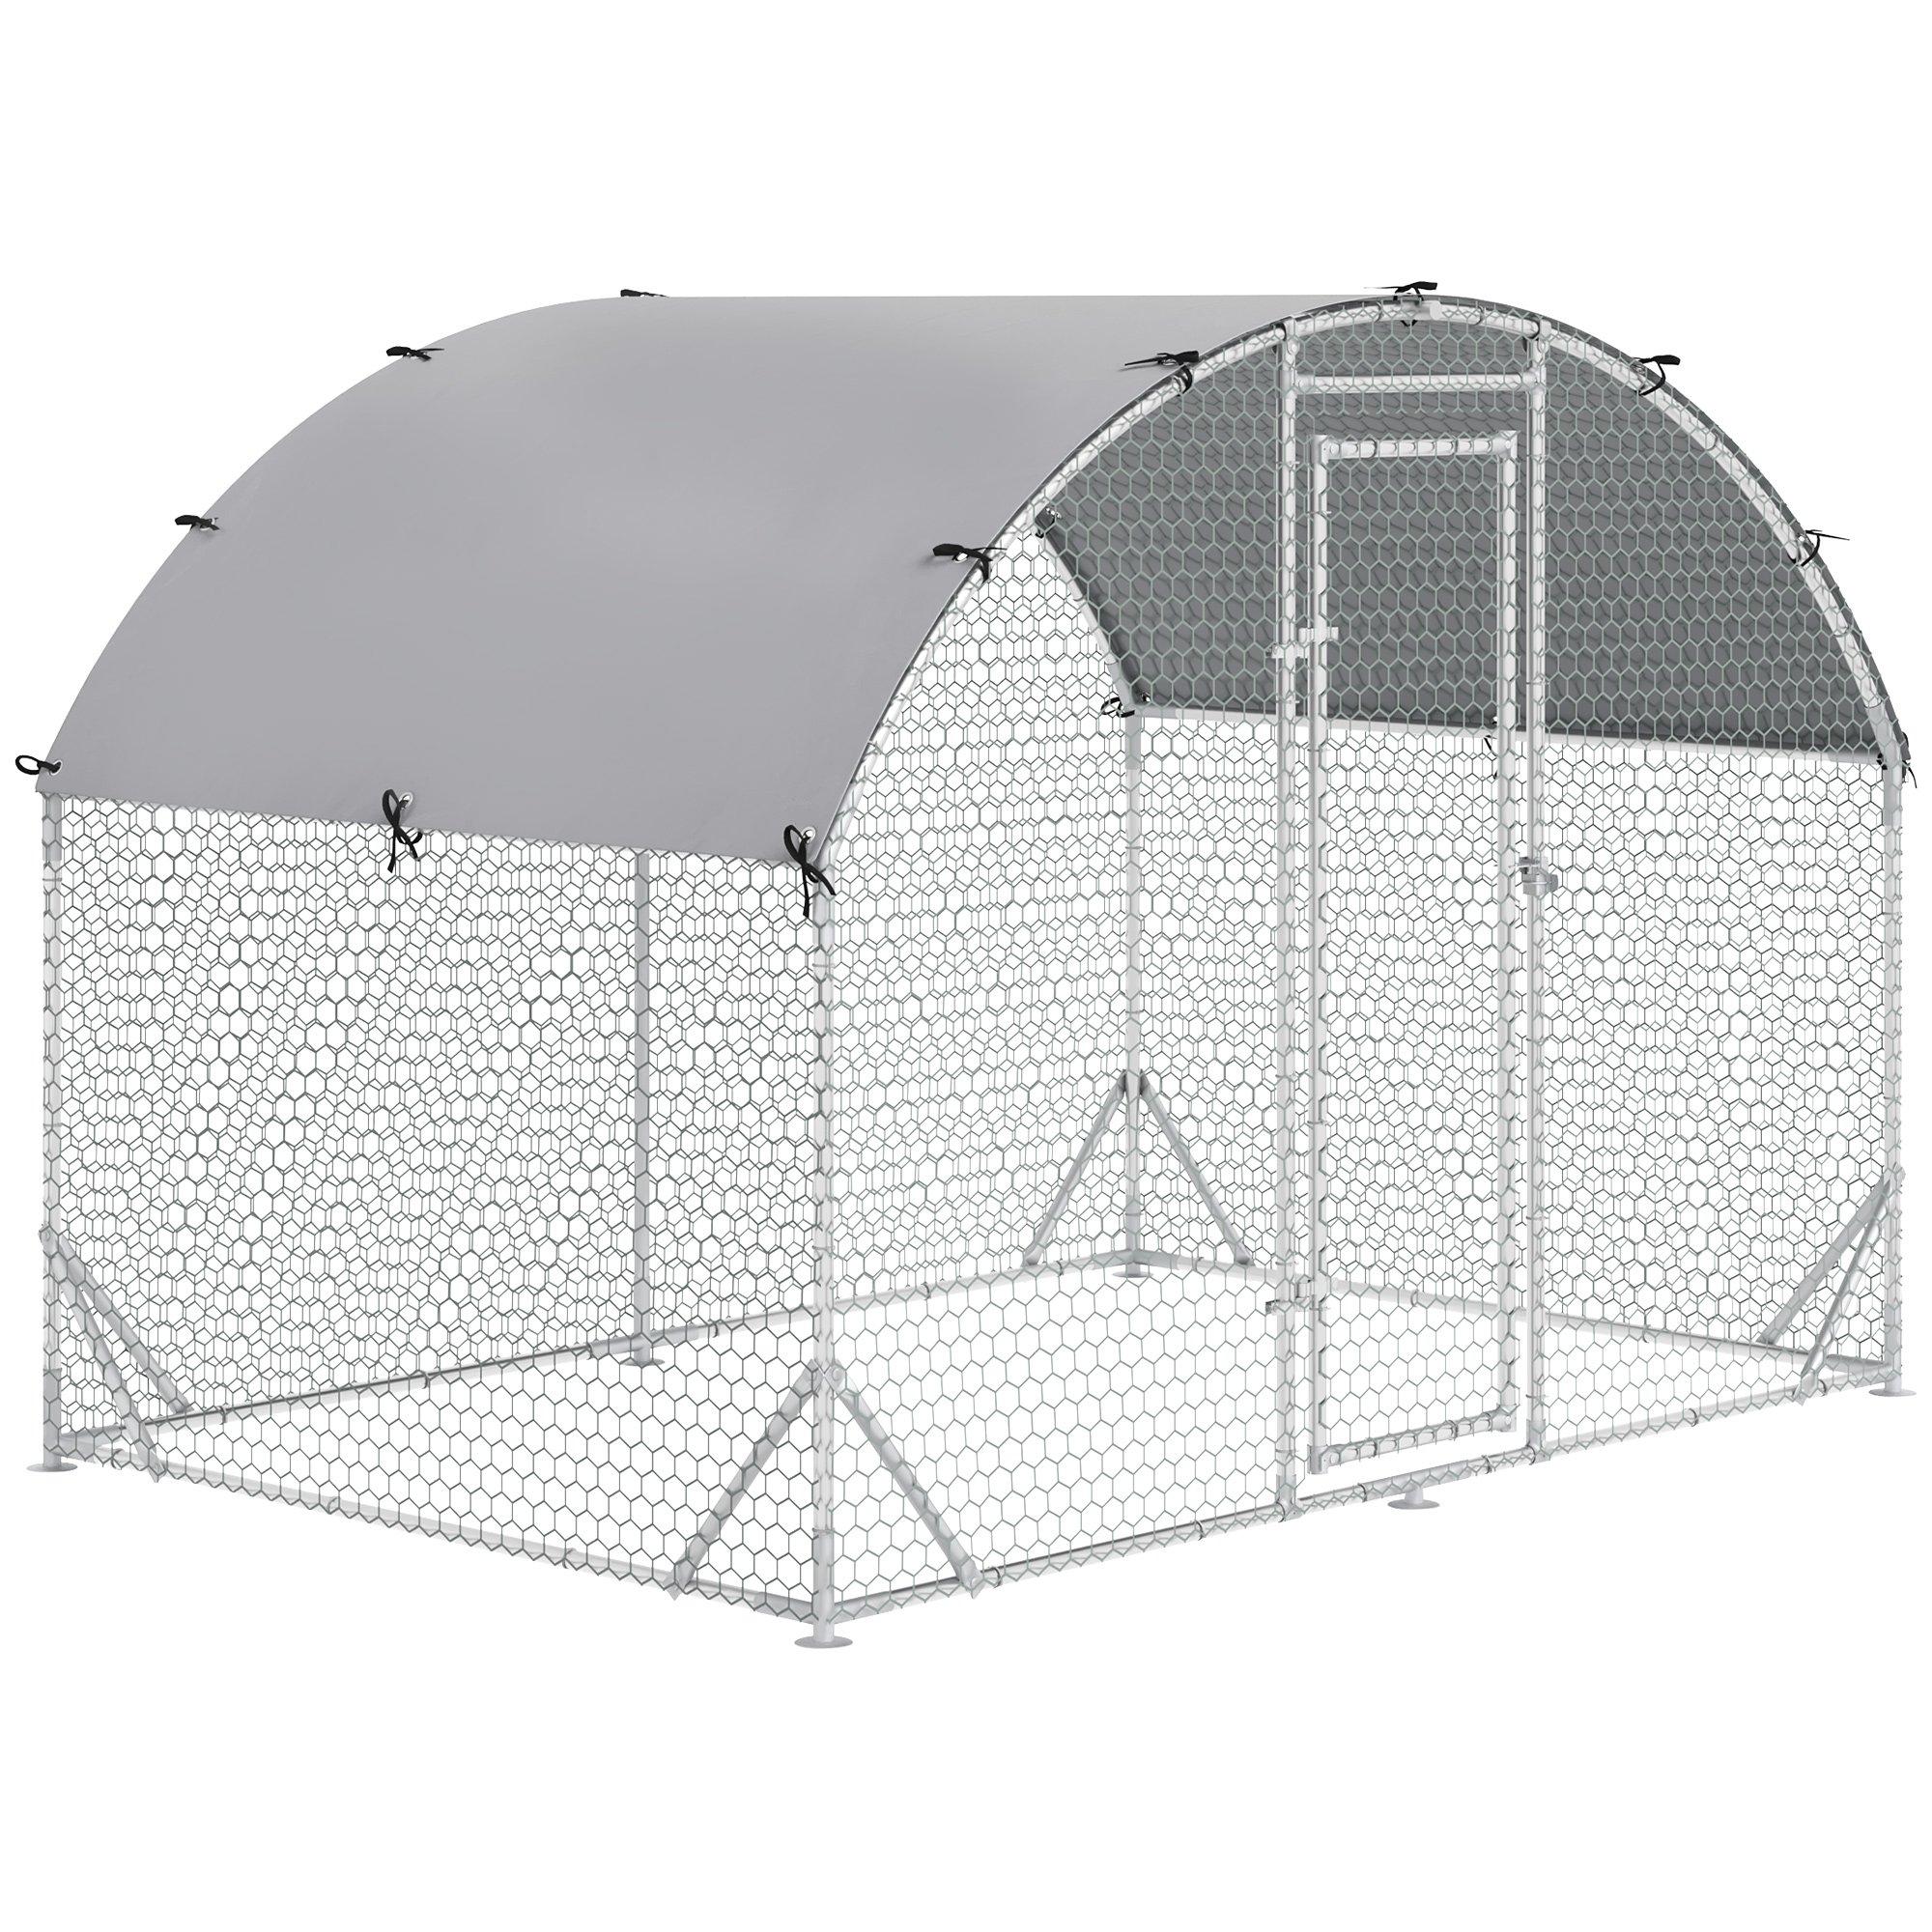 Chicken Run 1 Room Galvanised Chicken Coop Hen House with Cover 2.8 x 1.9 x 2m